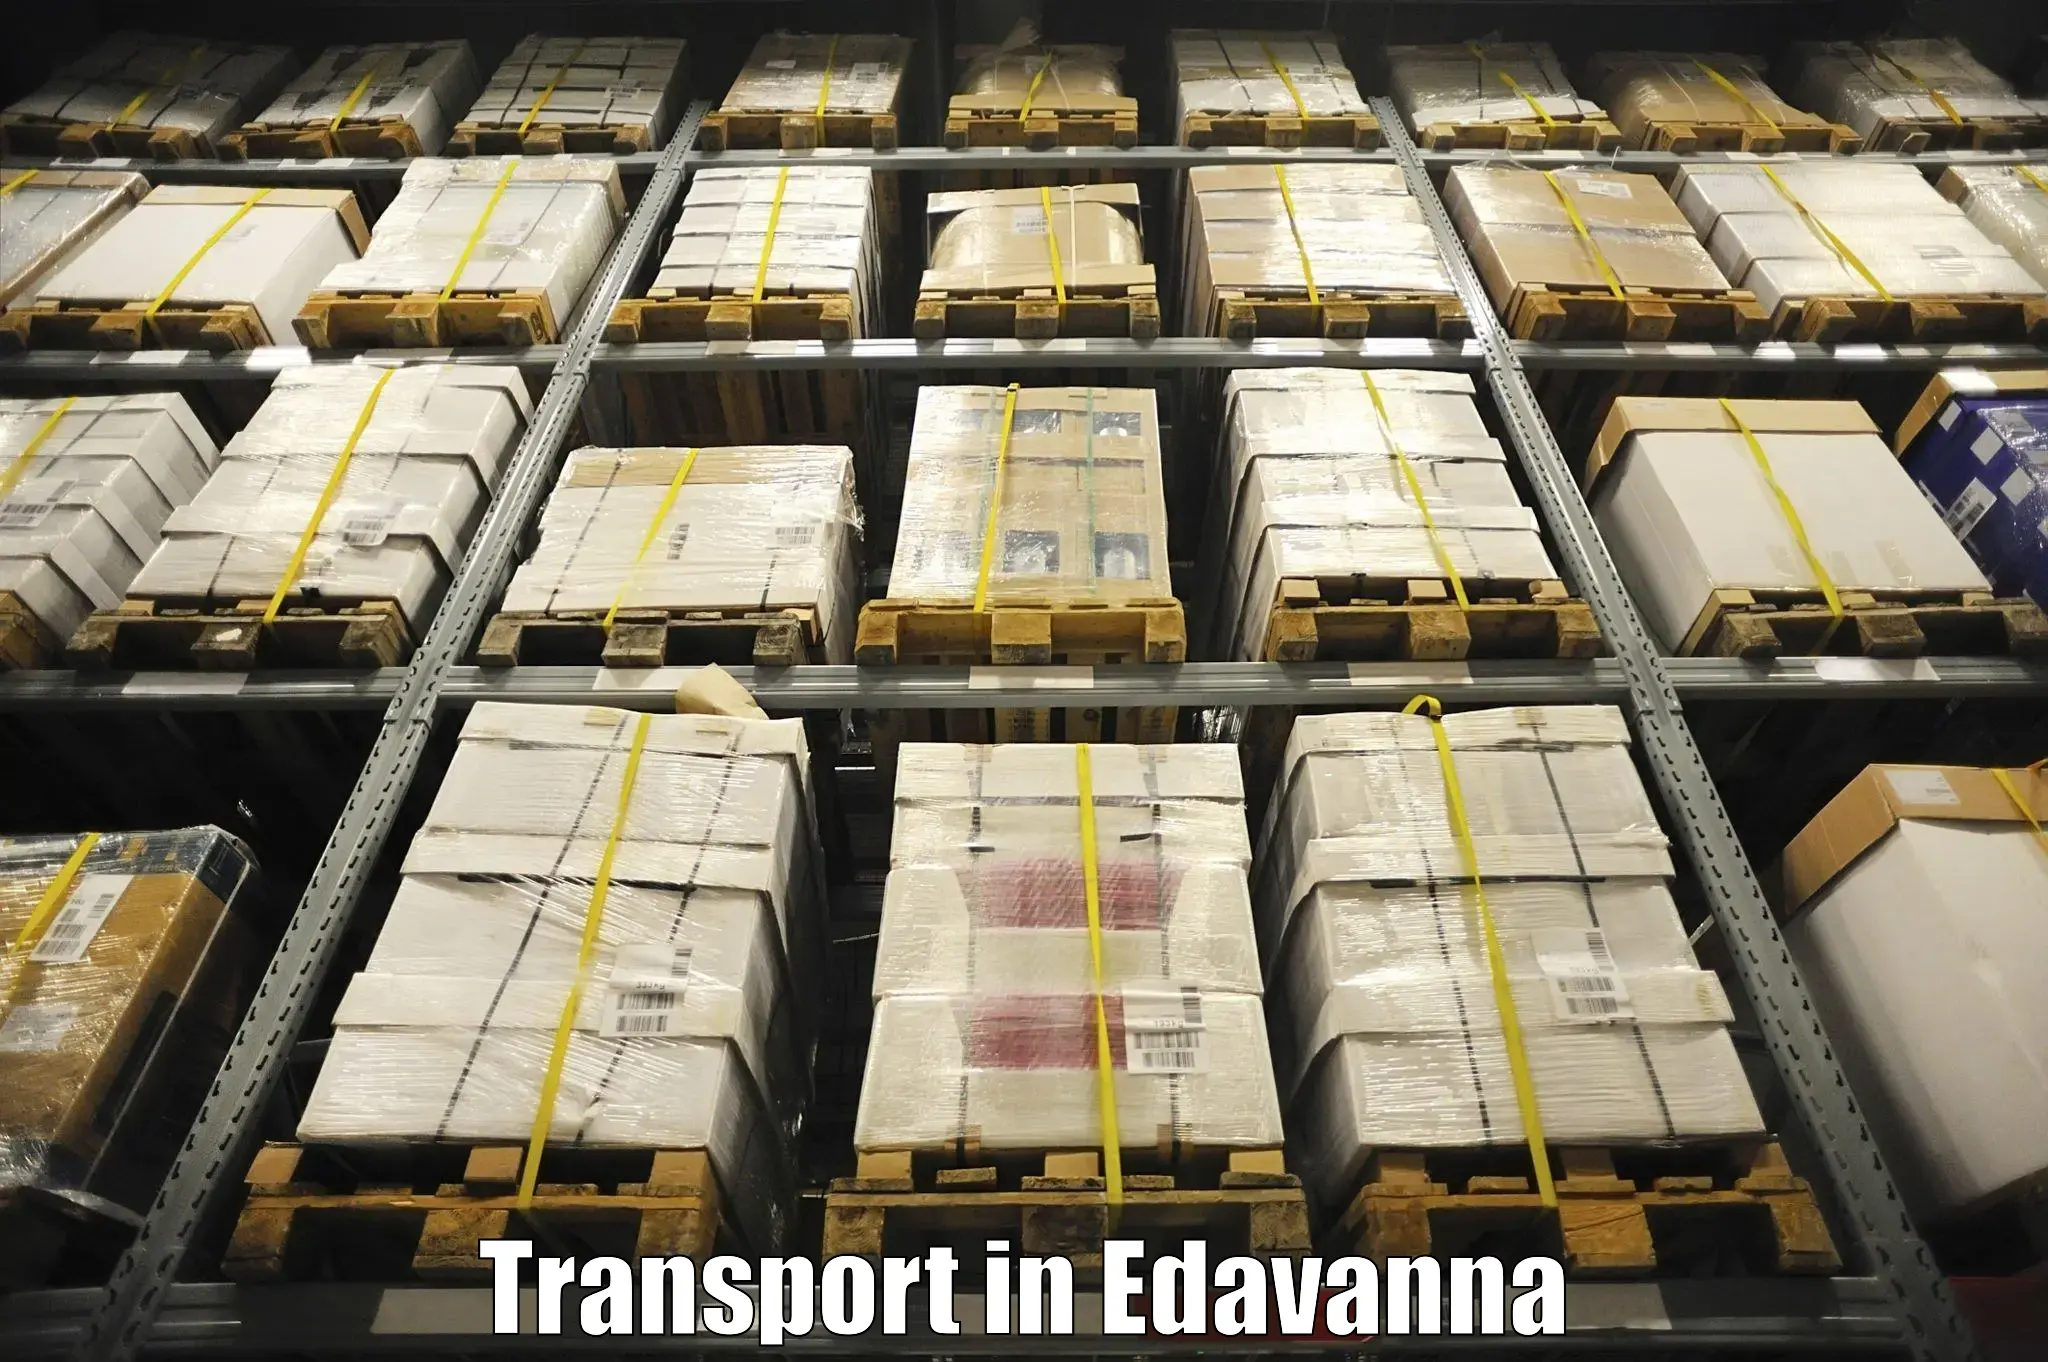 Luggage transport services in Edavanna